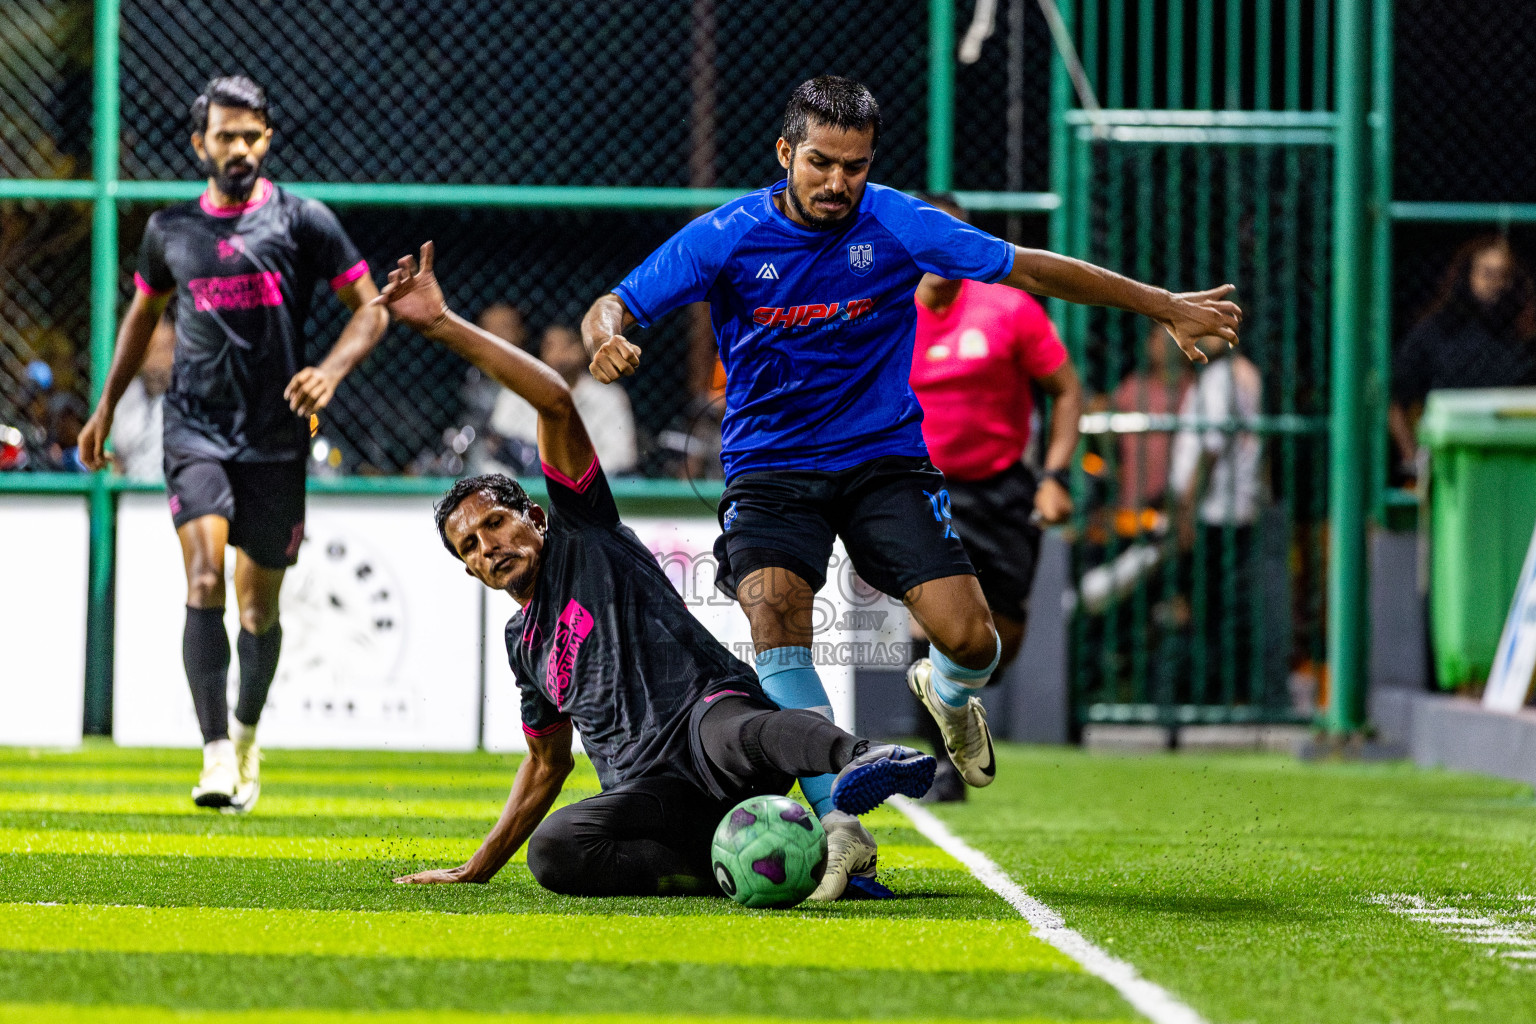 FC Calms Blue vs JJ Sports Club in Day 1 of Quarter Finals of BG Futsal Challenge 2024 was held on Friday , 29th March 2024, in Male', Maldives Photos: Nausham Waheed / images.mv